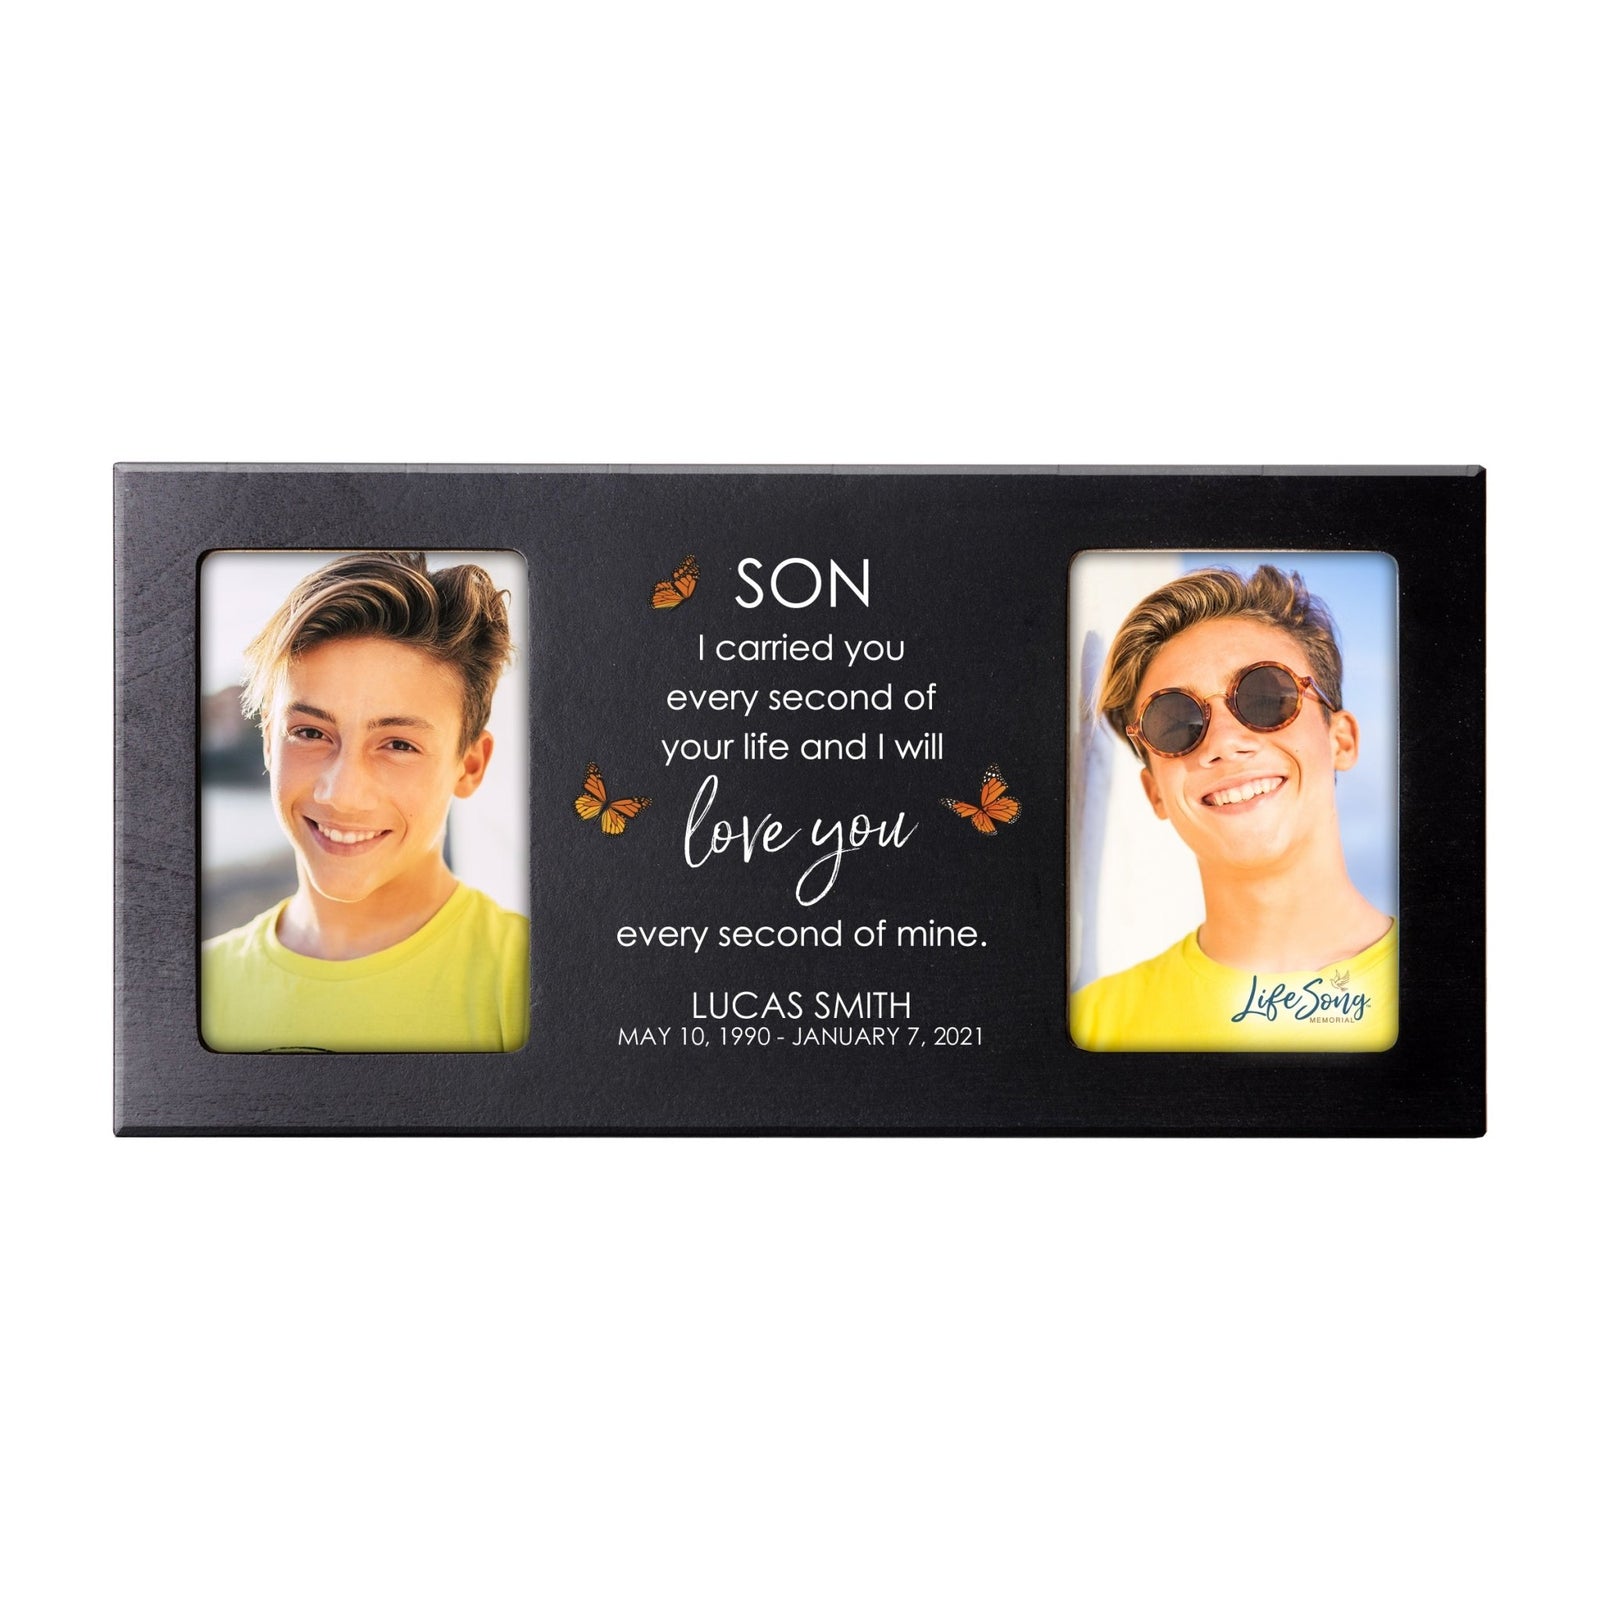 Custom Memorial Picture Frame 16x8in Holds Two 4x6in Photos - Son, I carried You - LifeSong Milestones